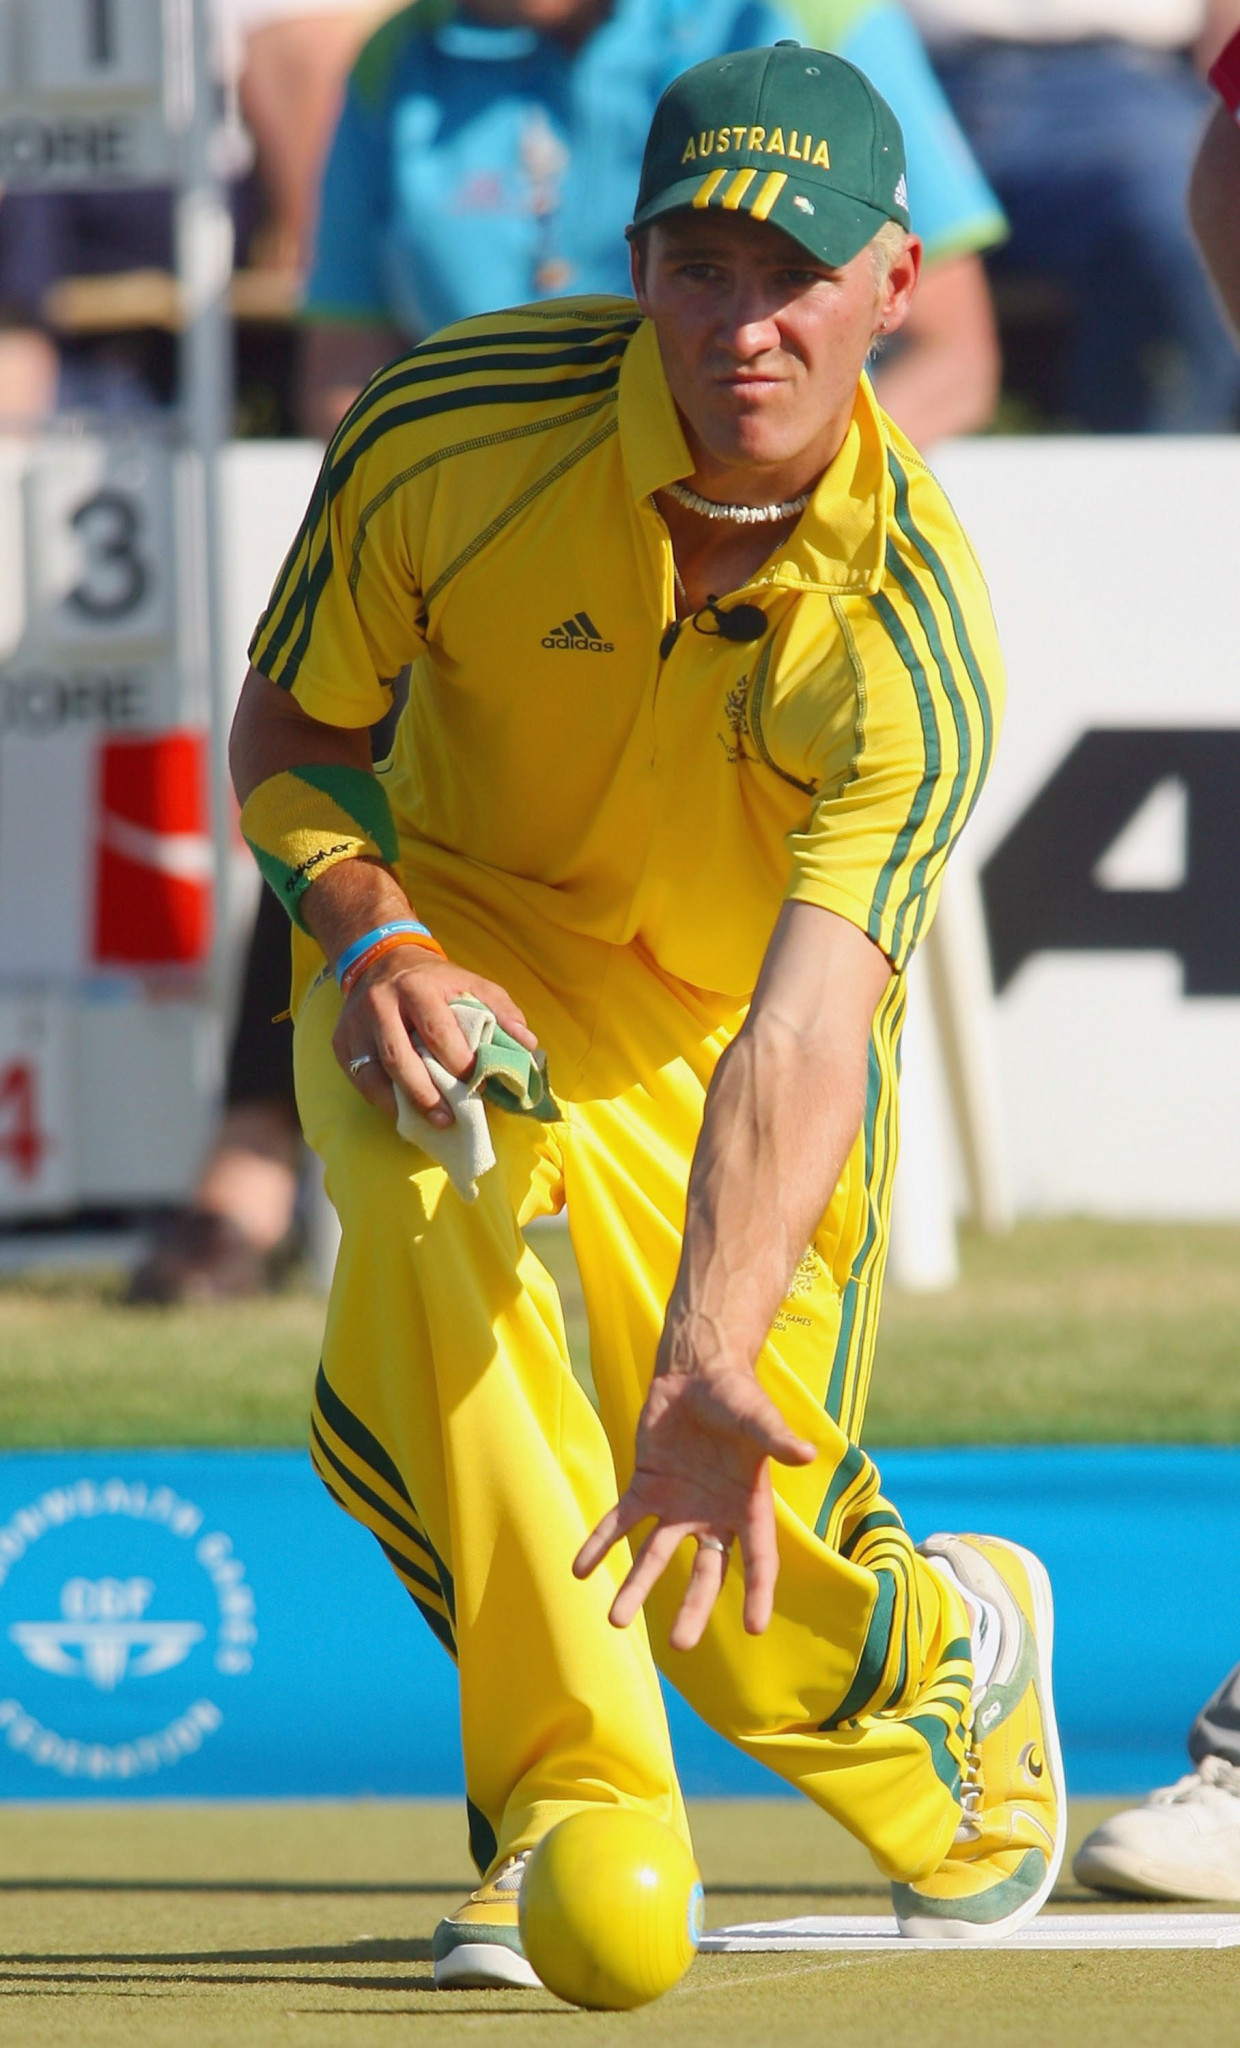 Barrie Lester, pictured here competing at the Melbourne 2006 Commonwealth Games, is among Australia's contingent of senior squad members for Gold Coast 2018 ©Getty Images